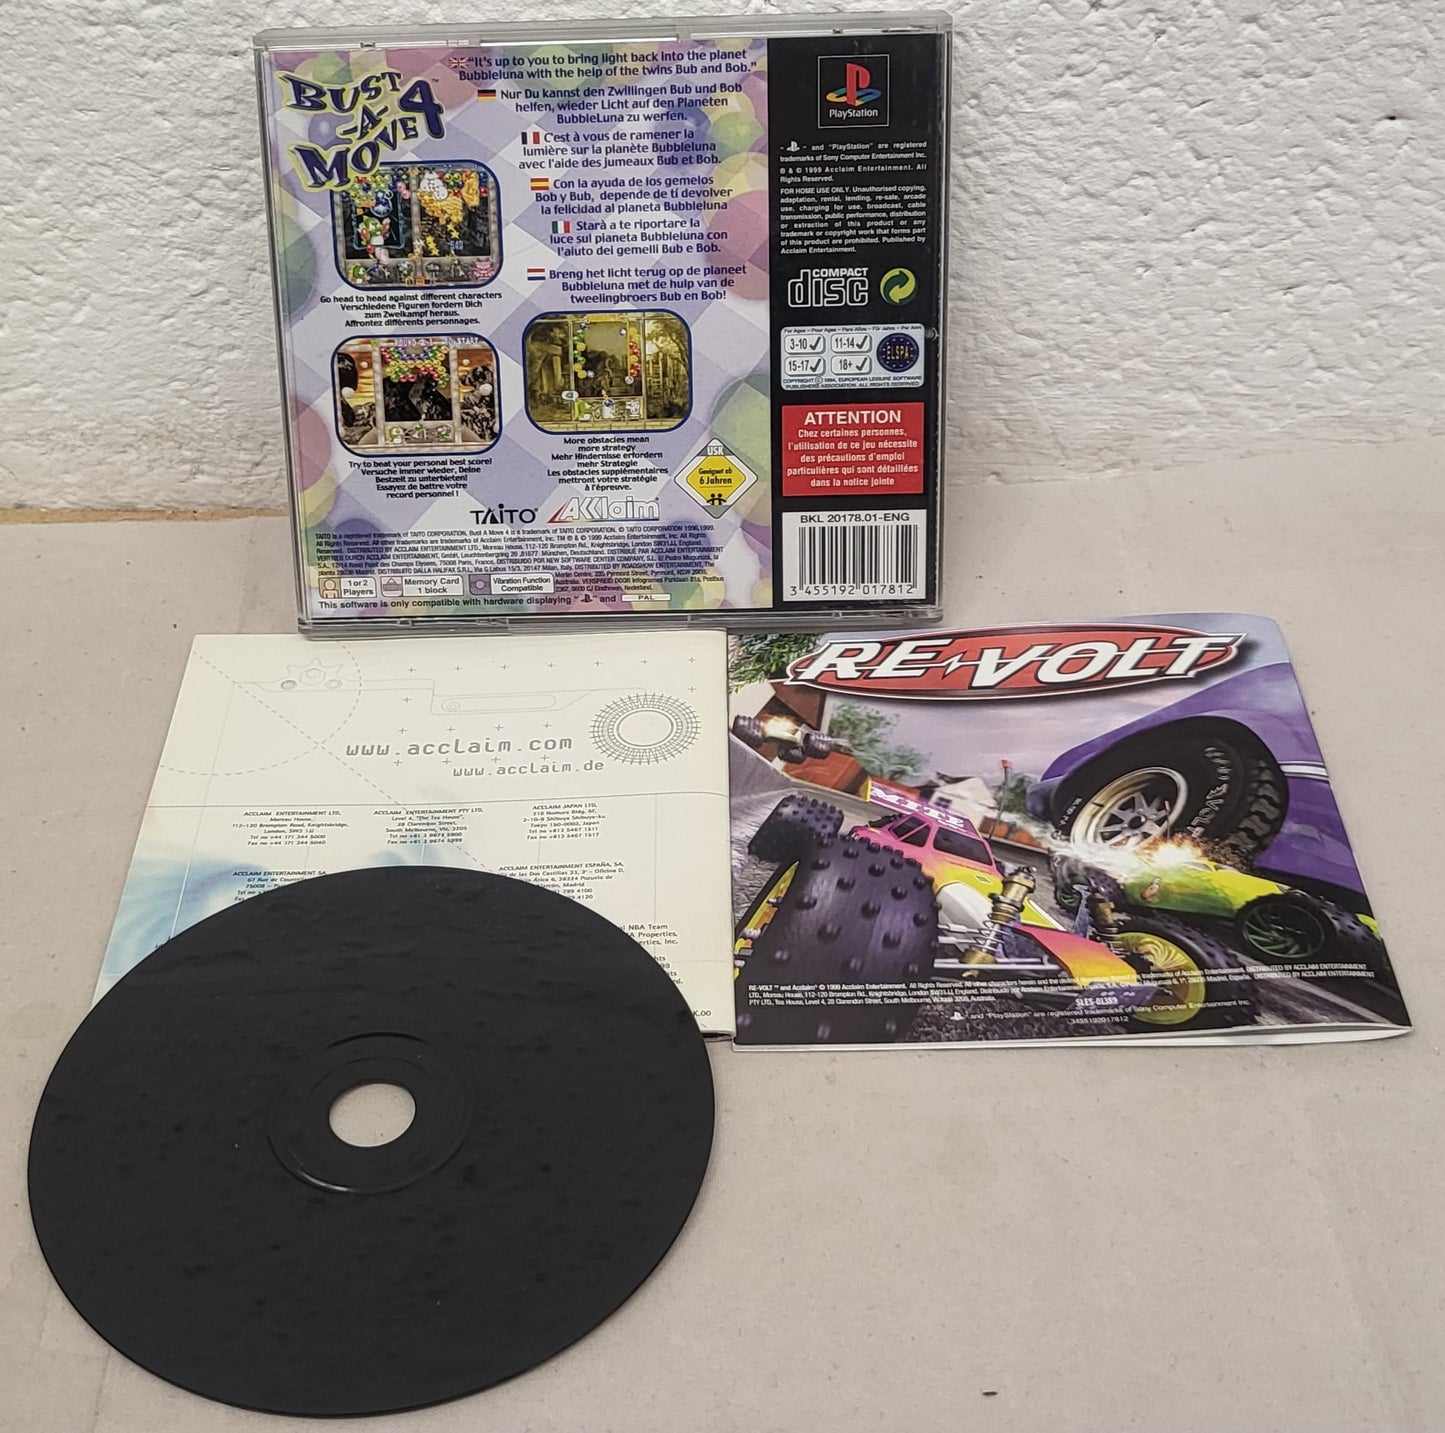 Bust-A-Move 4 RARE Black Label Version Sony Playstation 1 (PS1) Game